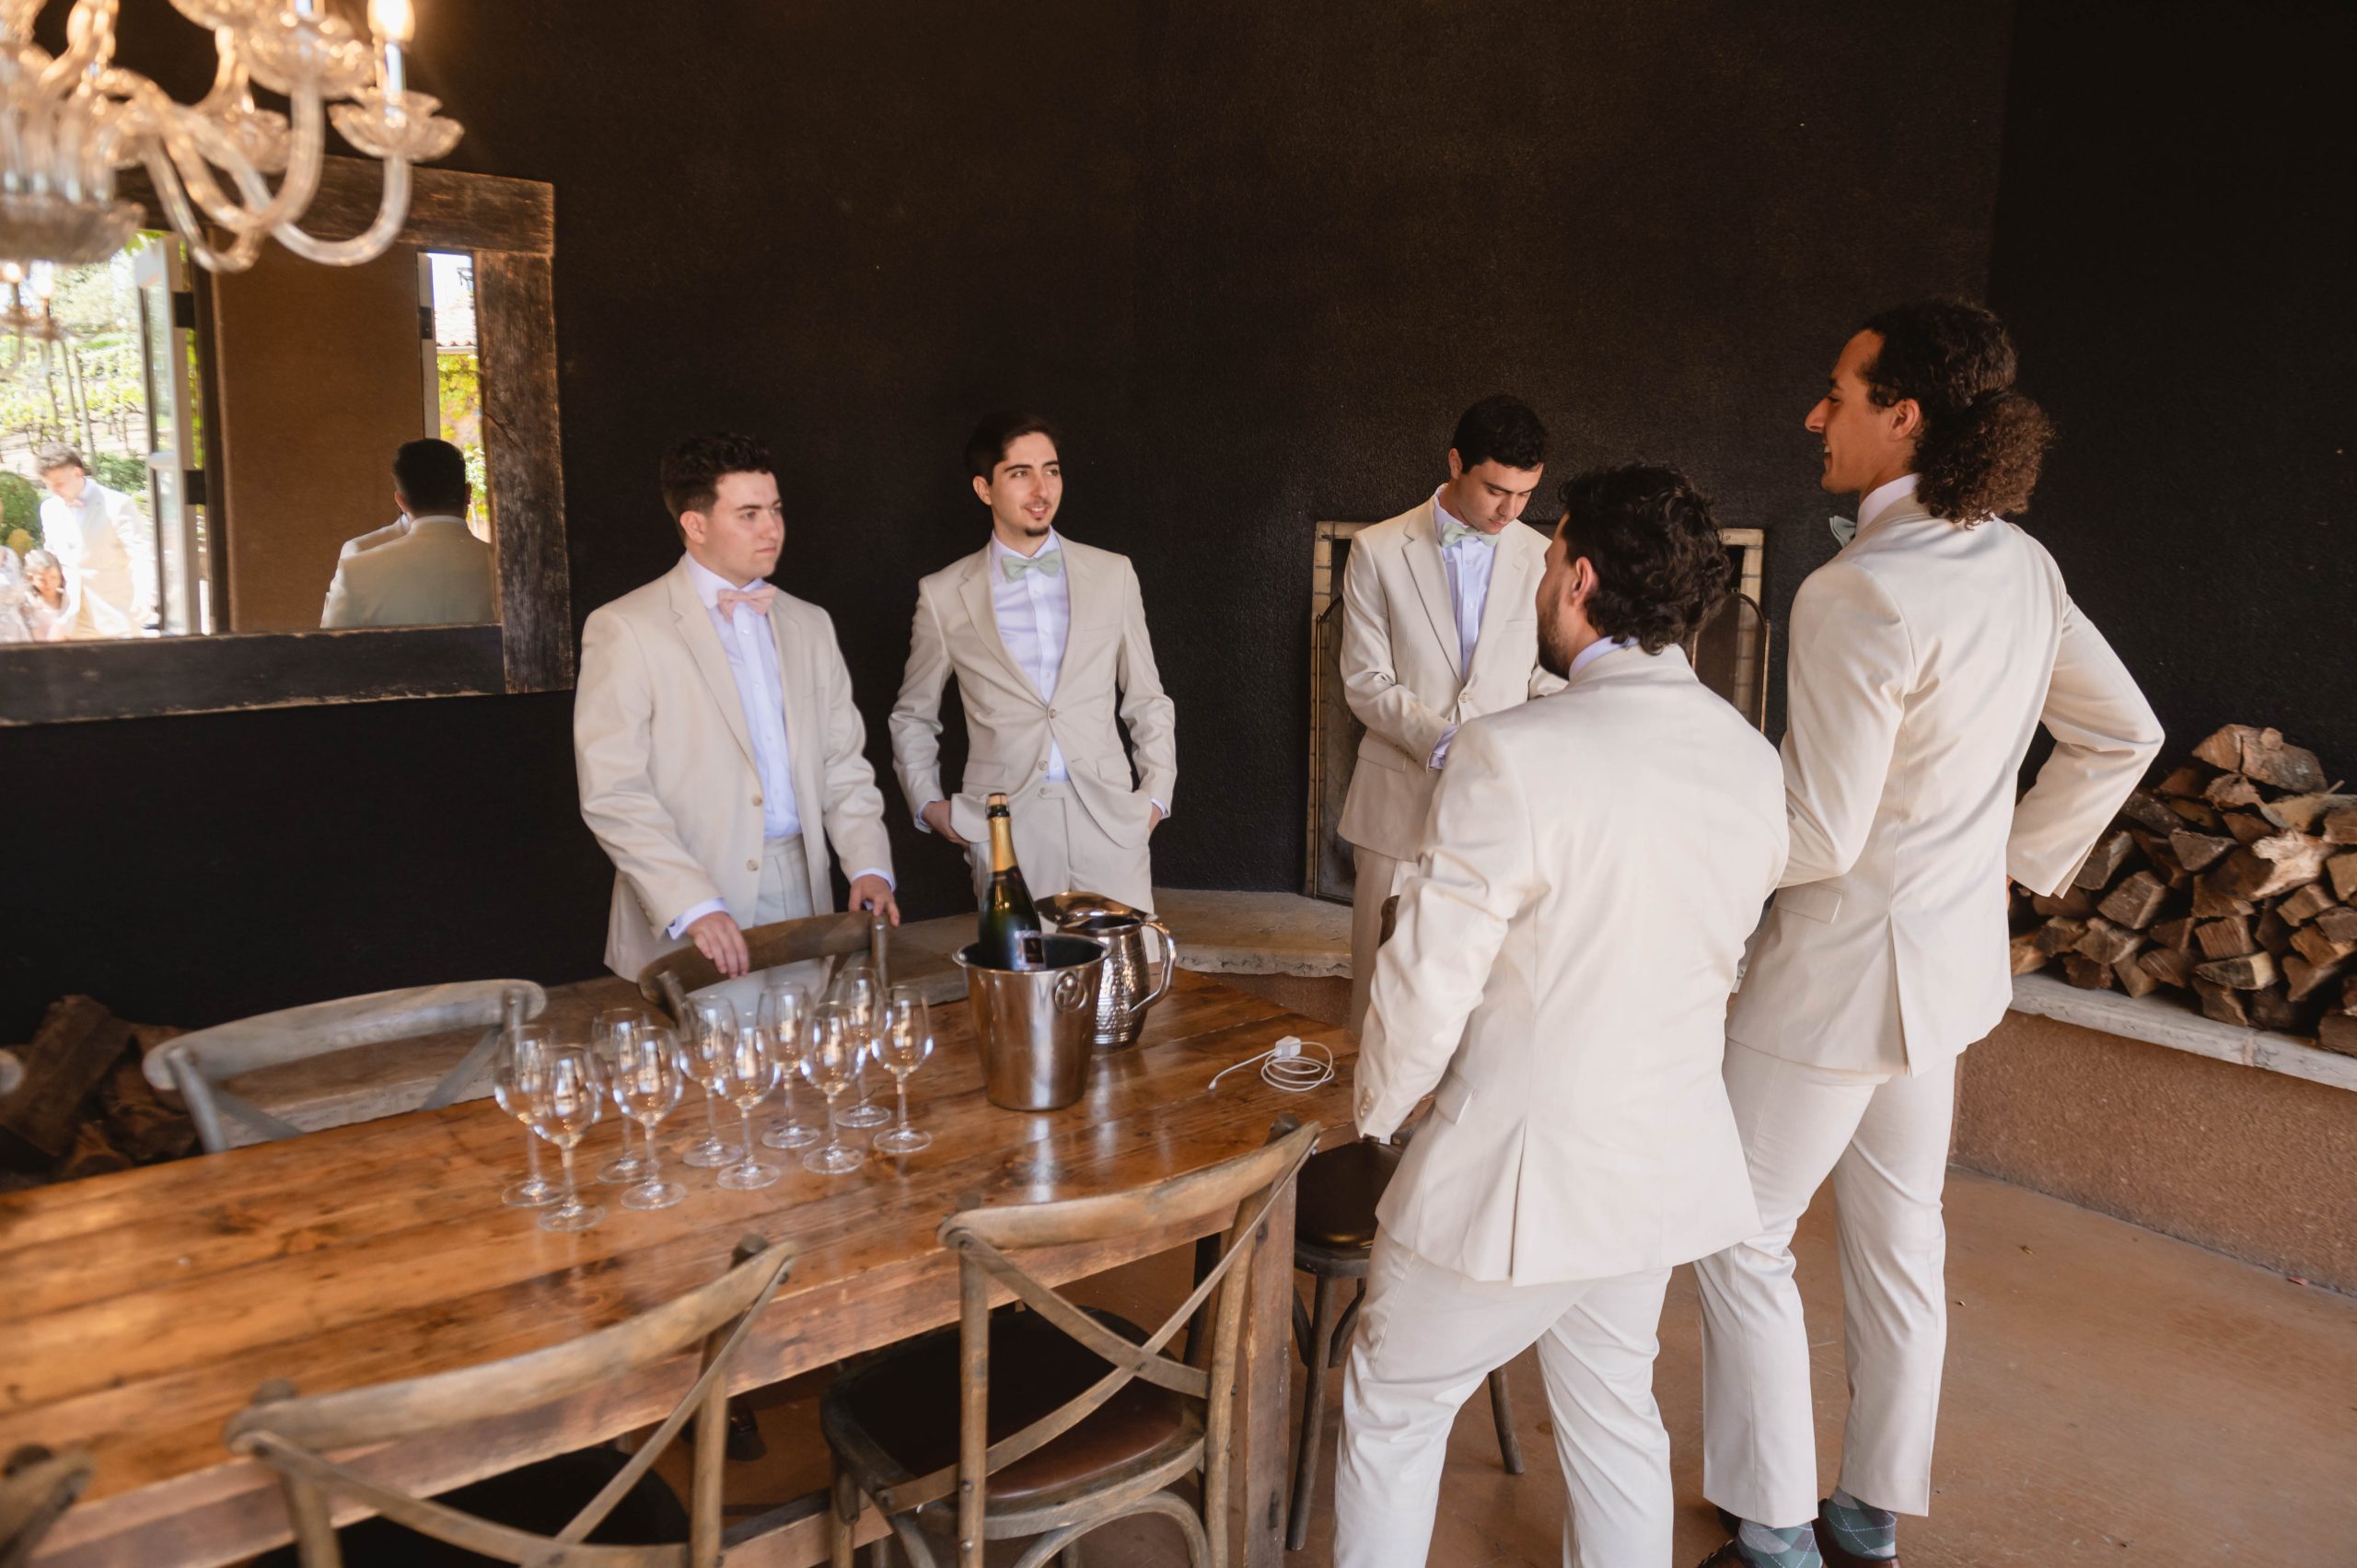 Groomsmen hanging out after getting ready at Viansa Grooms' room in Sonoma